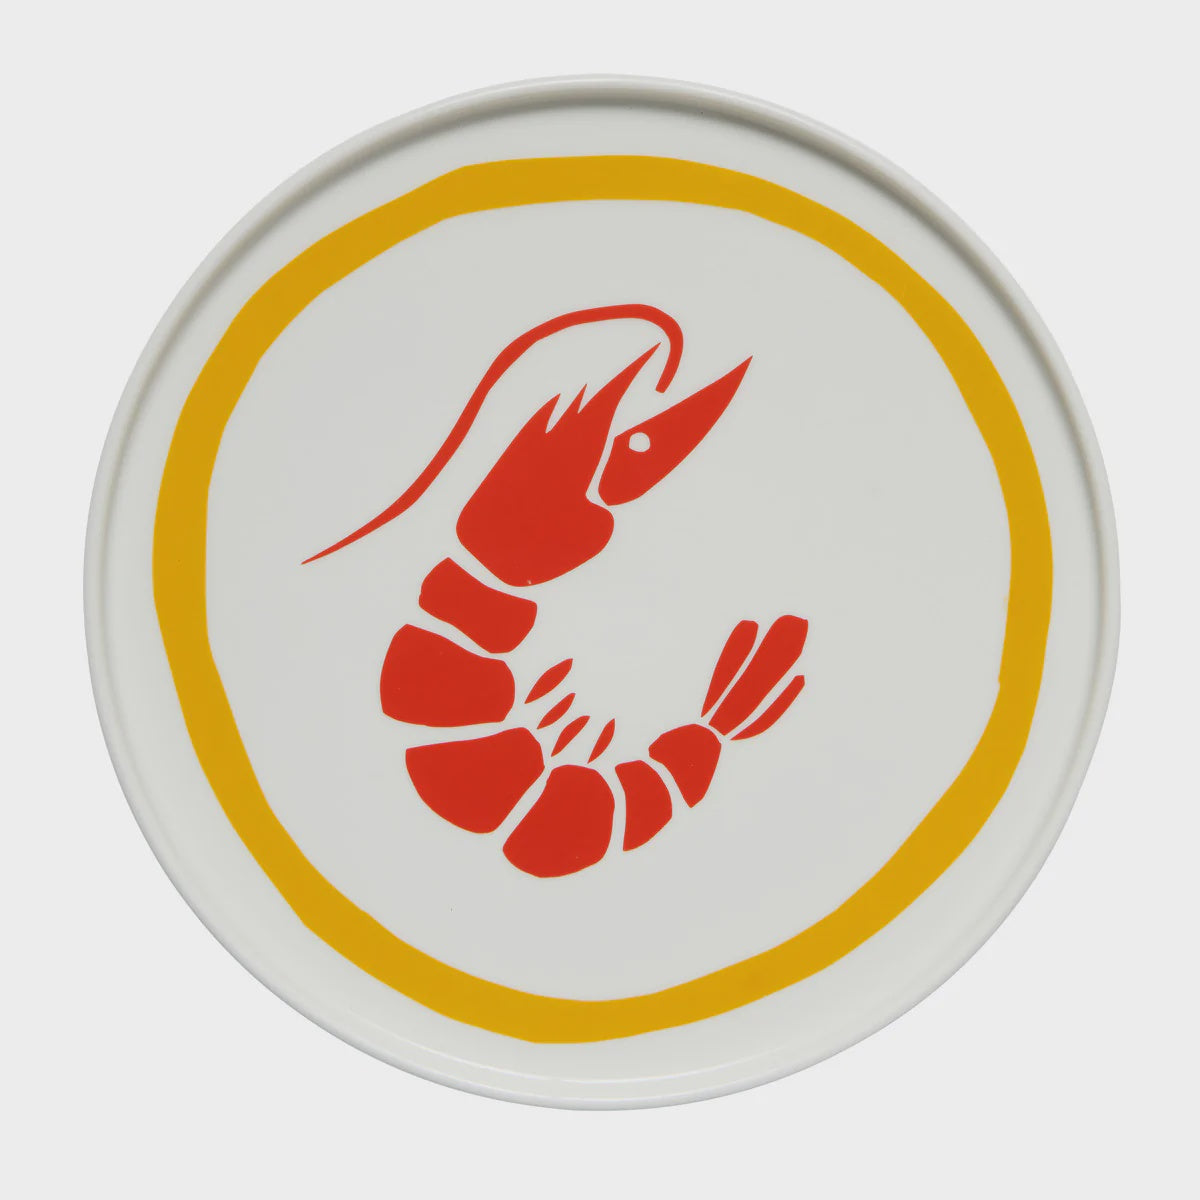 Prawn Plate - CLICK & COLLECT ONLY